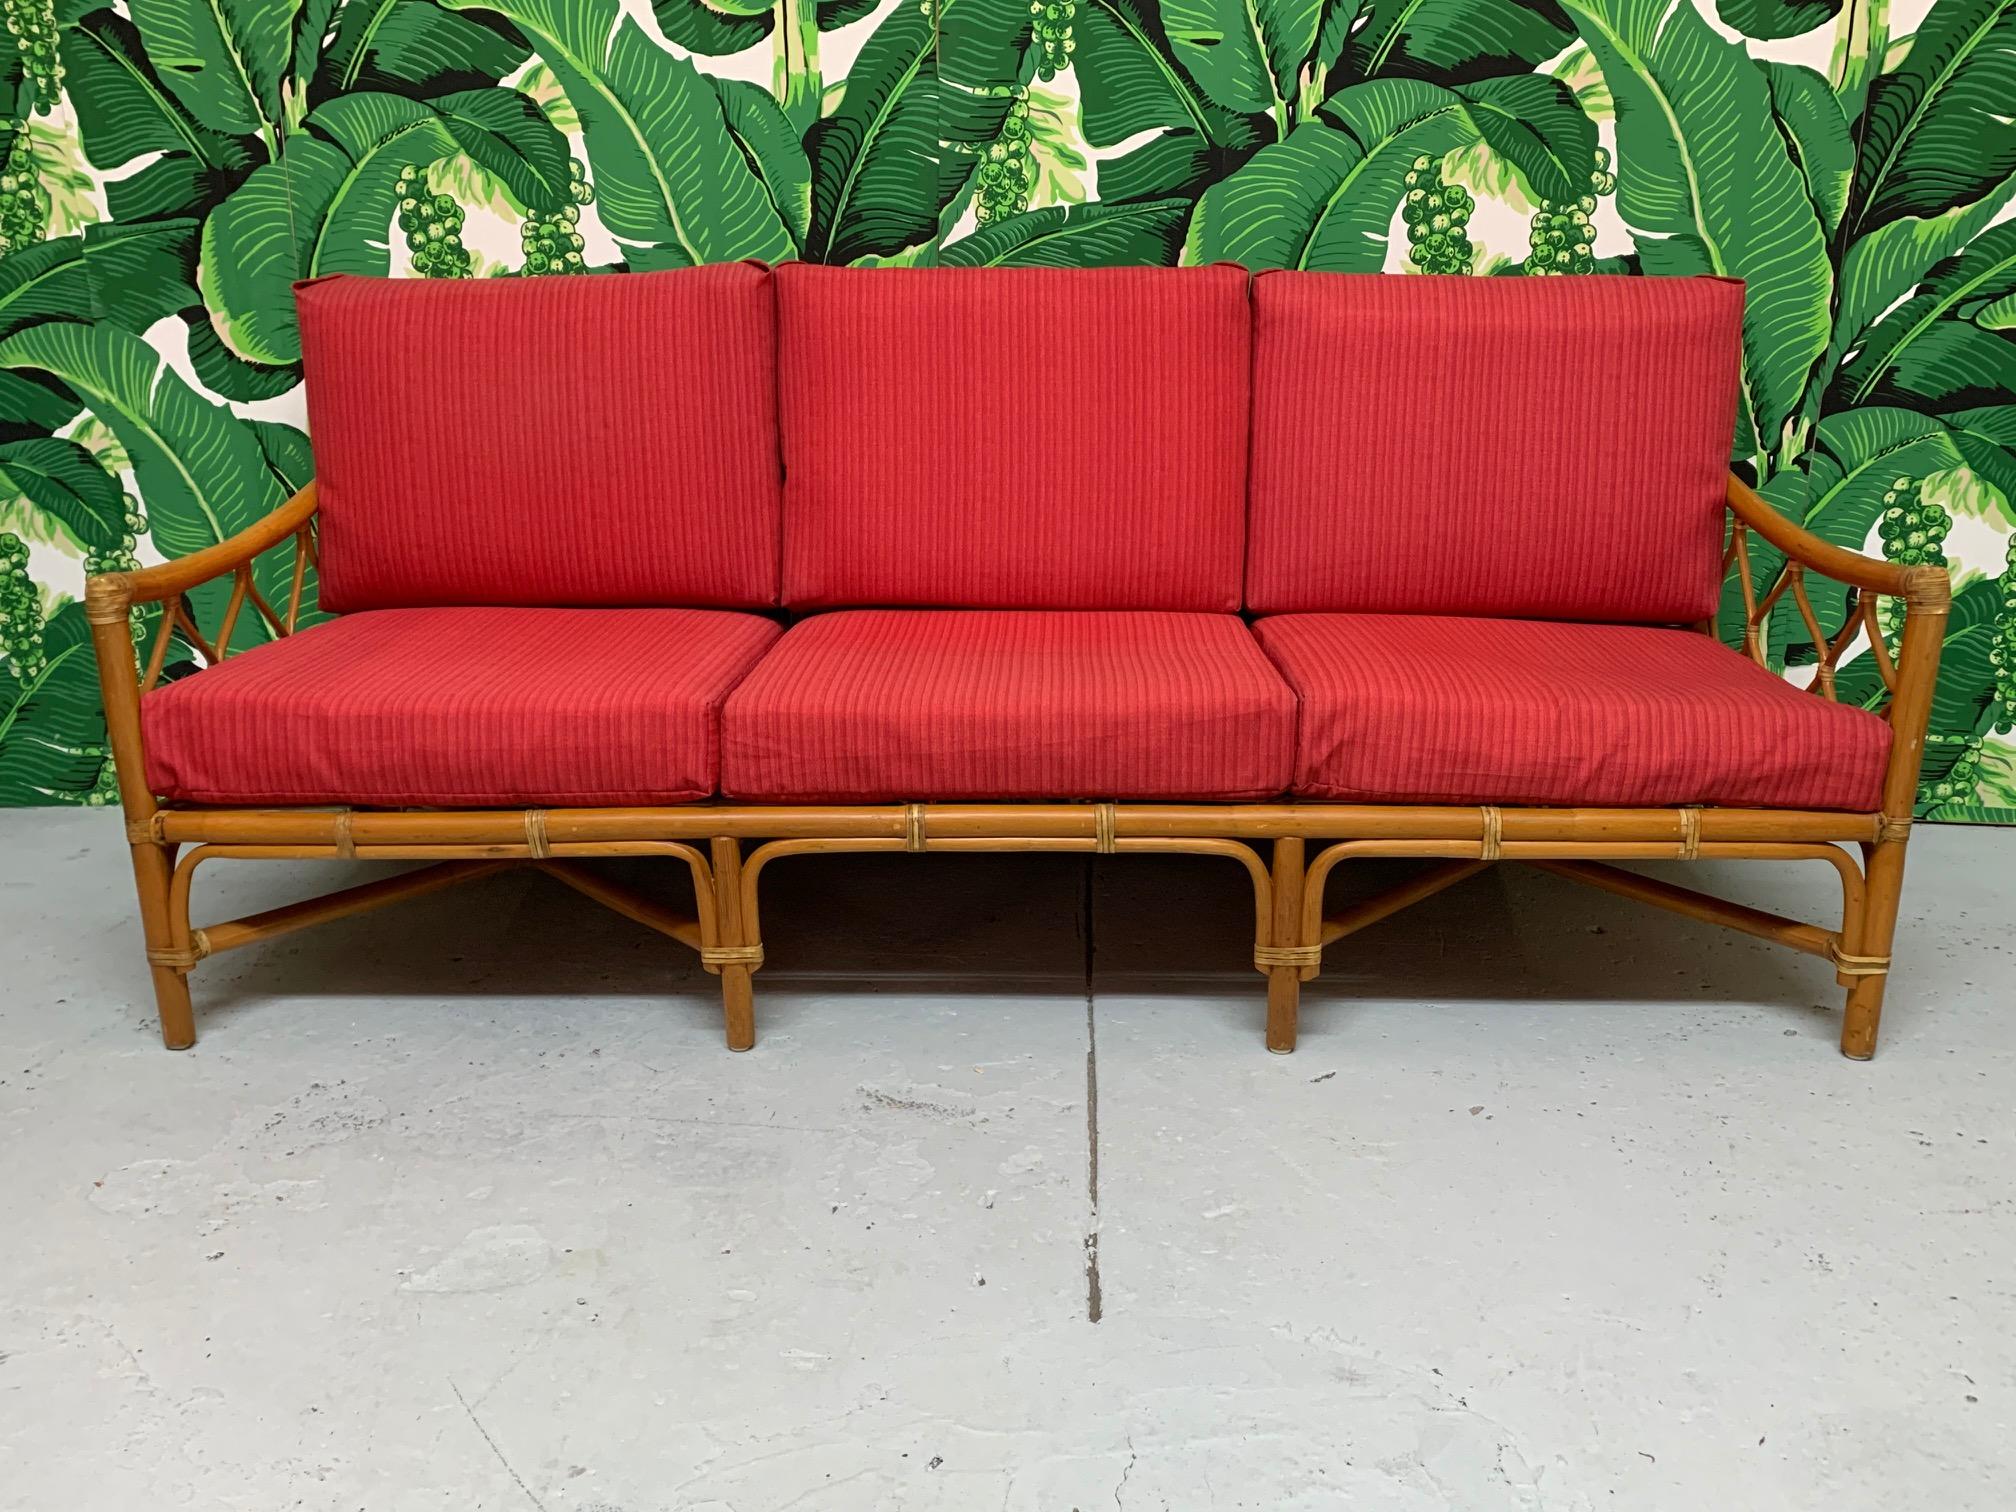 Rattan sofa features leather wrapped joints and cross-hatch rattan detailing. Cushions are upholstered in an indoor/outdoor fabric. Very good vintage condition, minor imperfections consistent with age, some slight discolorations on cushions.